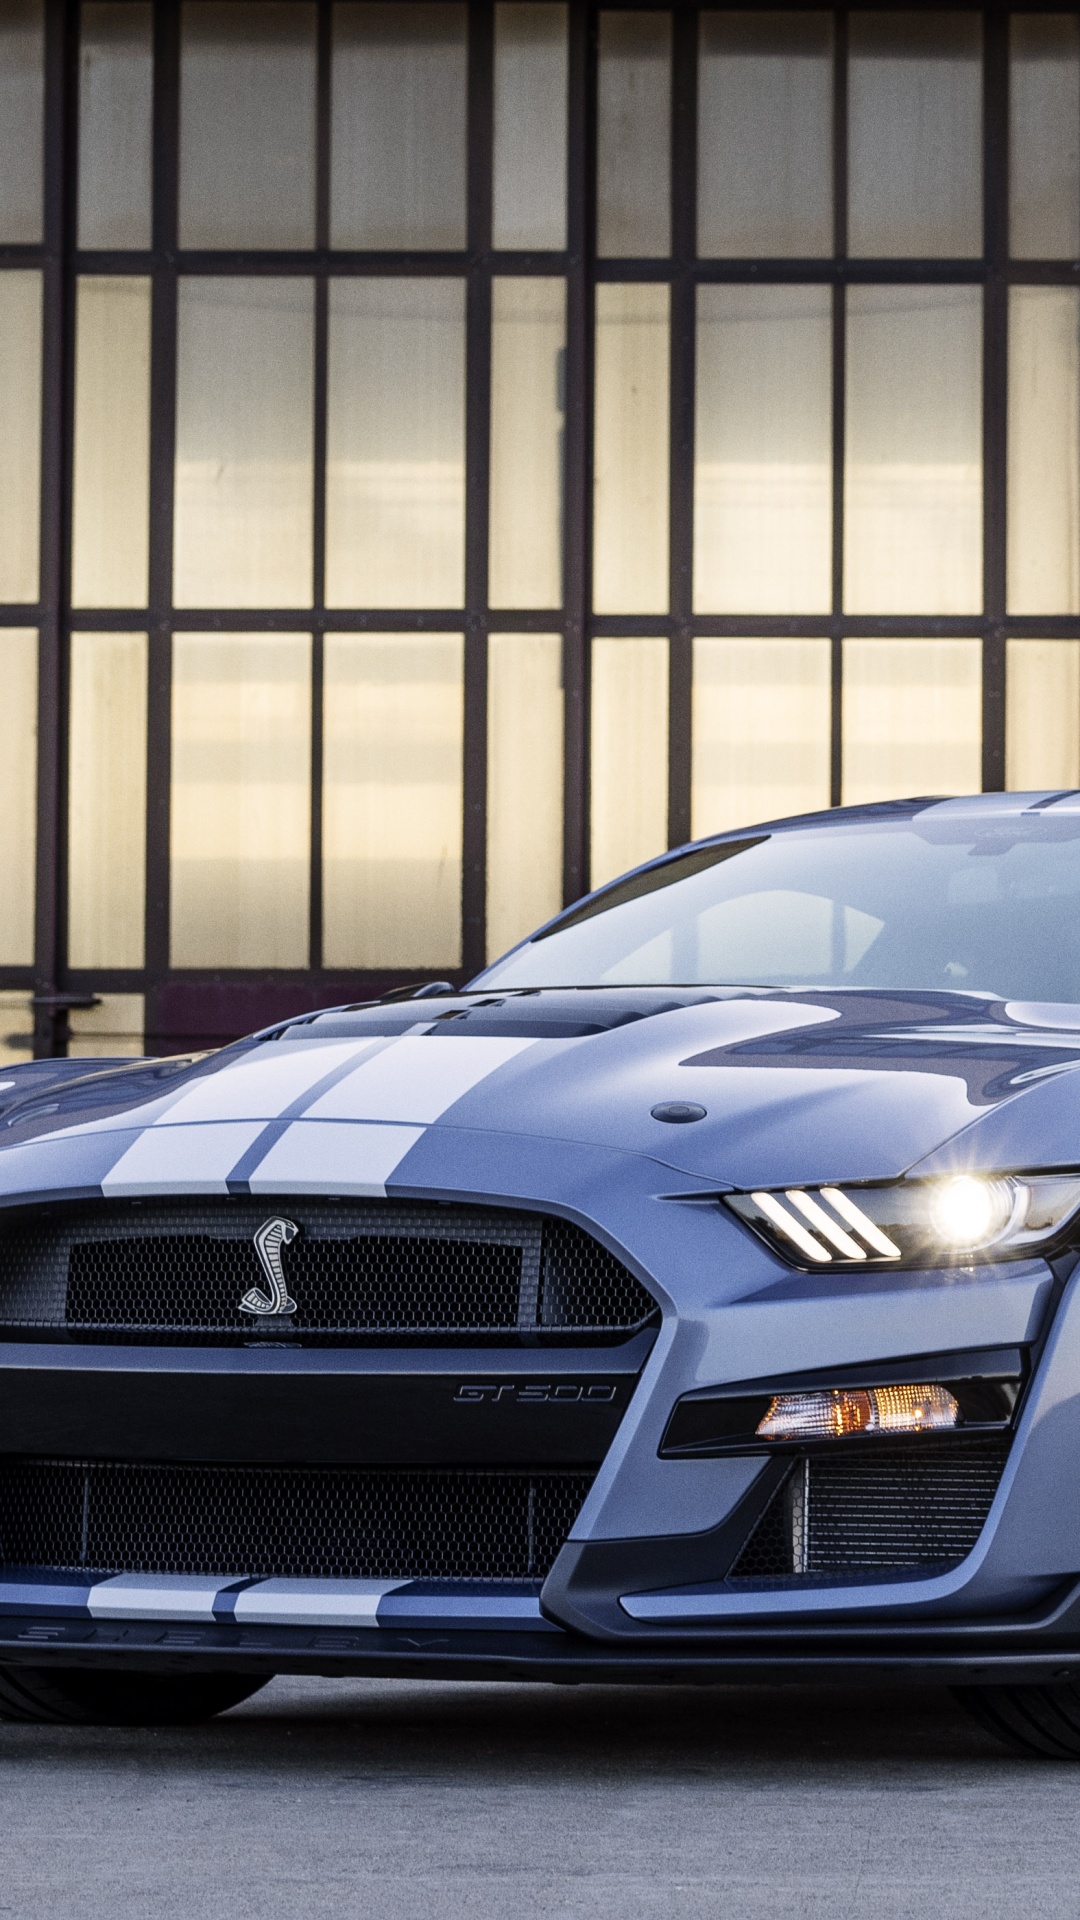 Ford Mustang Shelby GT500 Wallpaper 4K, Heritage Edition, 2022, Cars, #6898